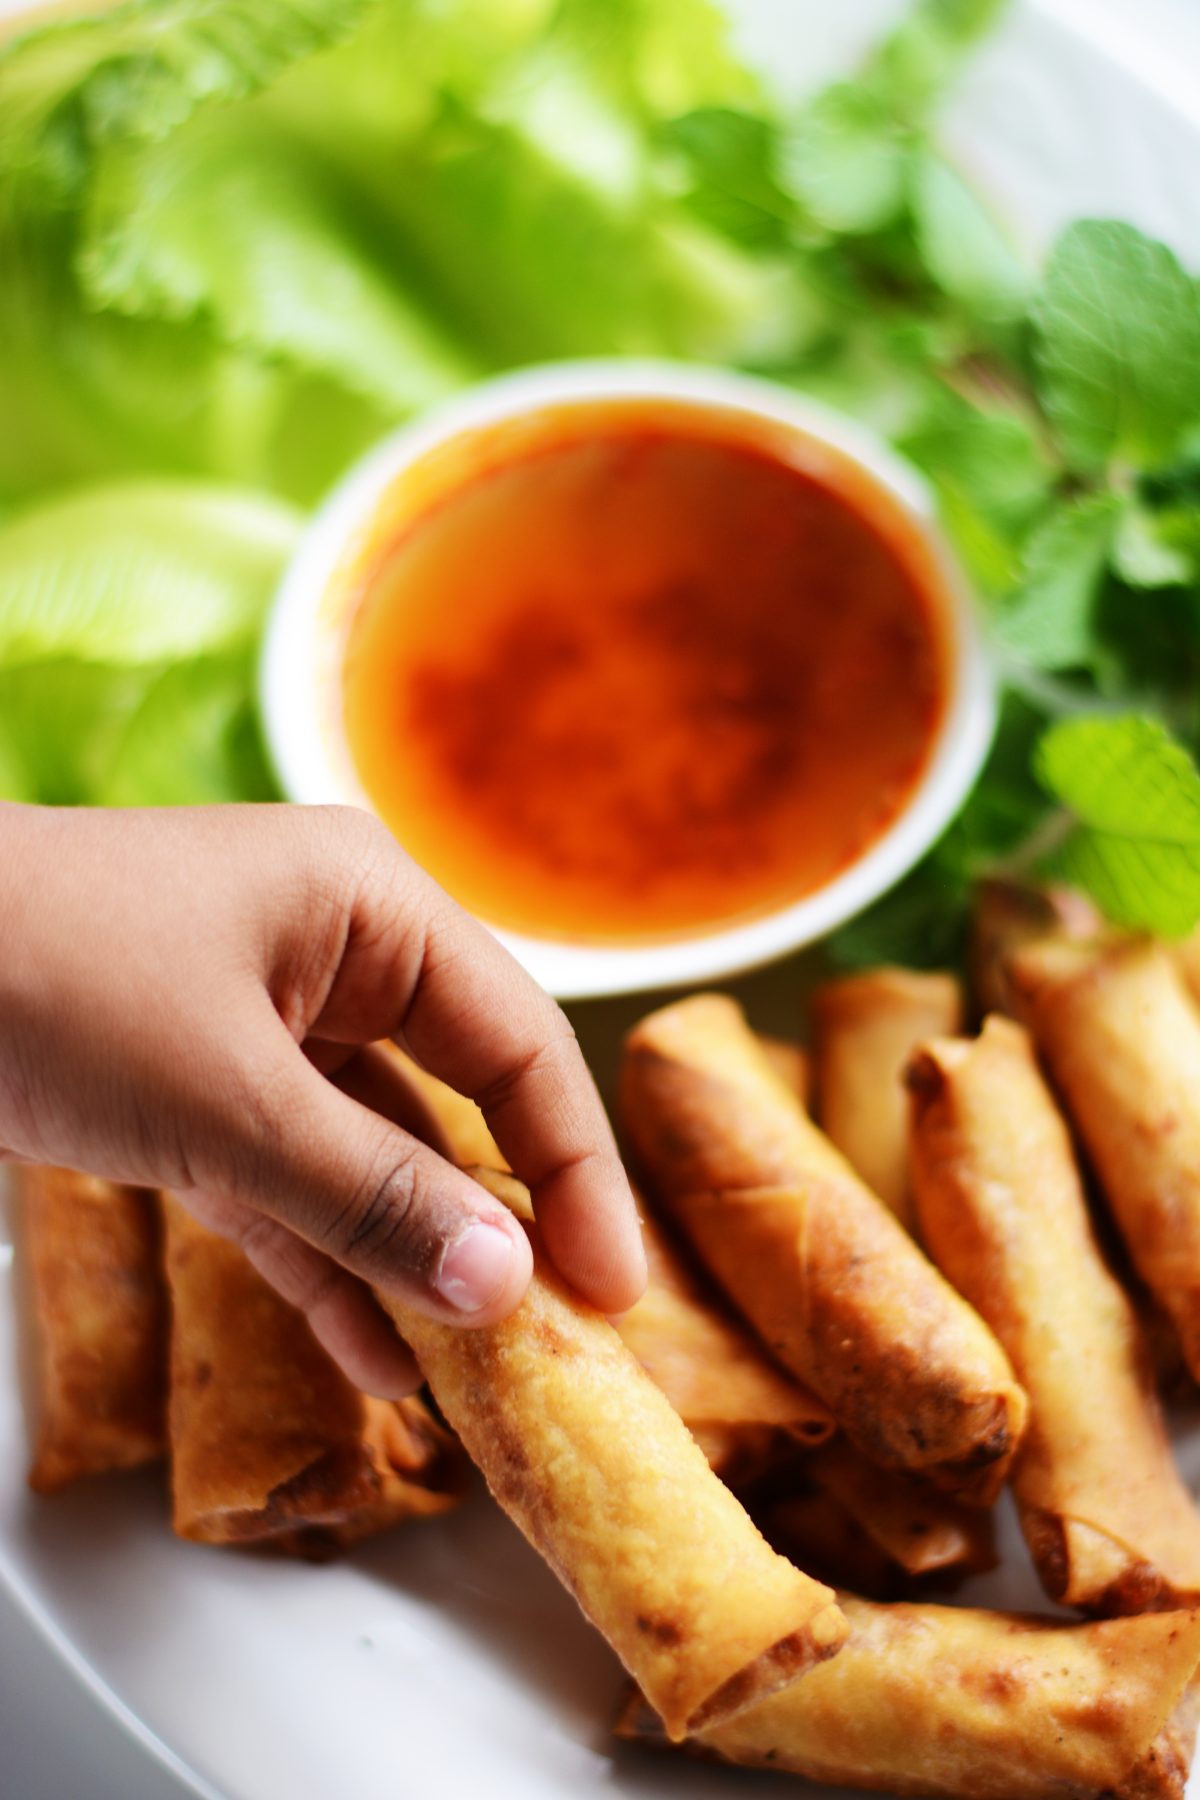 Vietnamese Prawns Spring Rolls - The ultimate party snack for kids and adults alike - thespiceadventuress.com